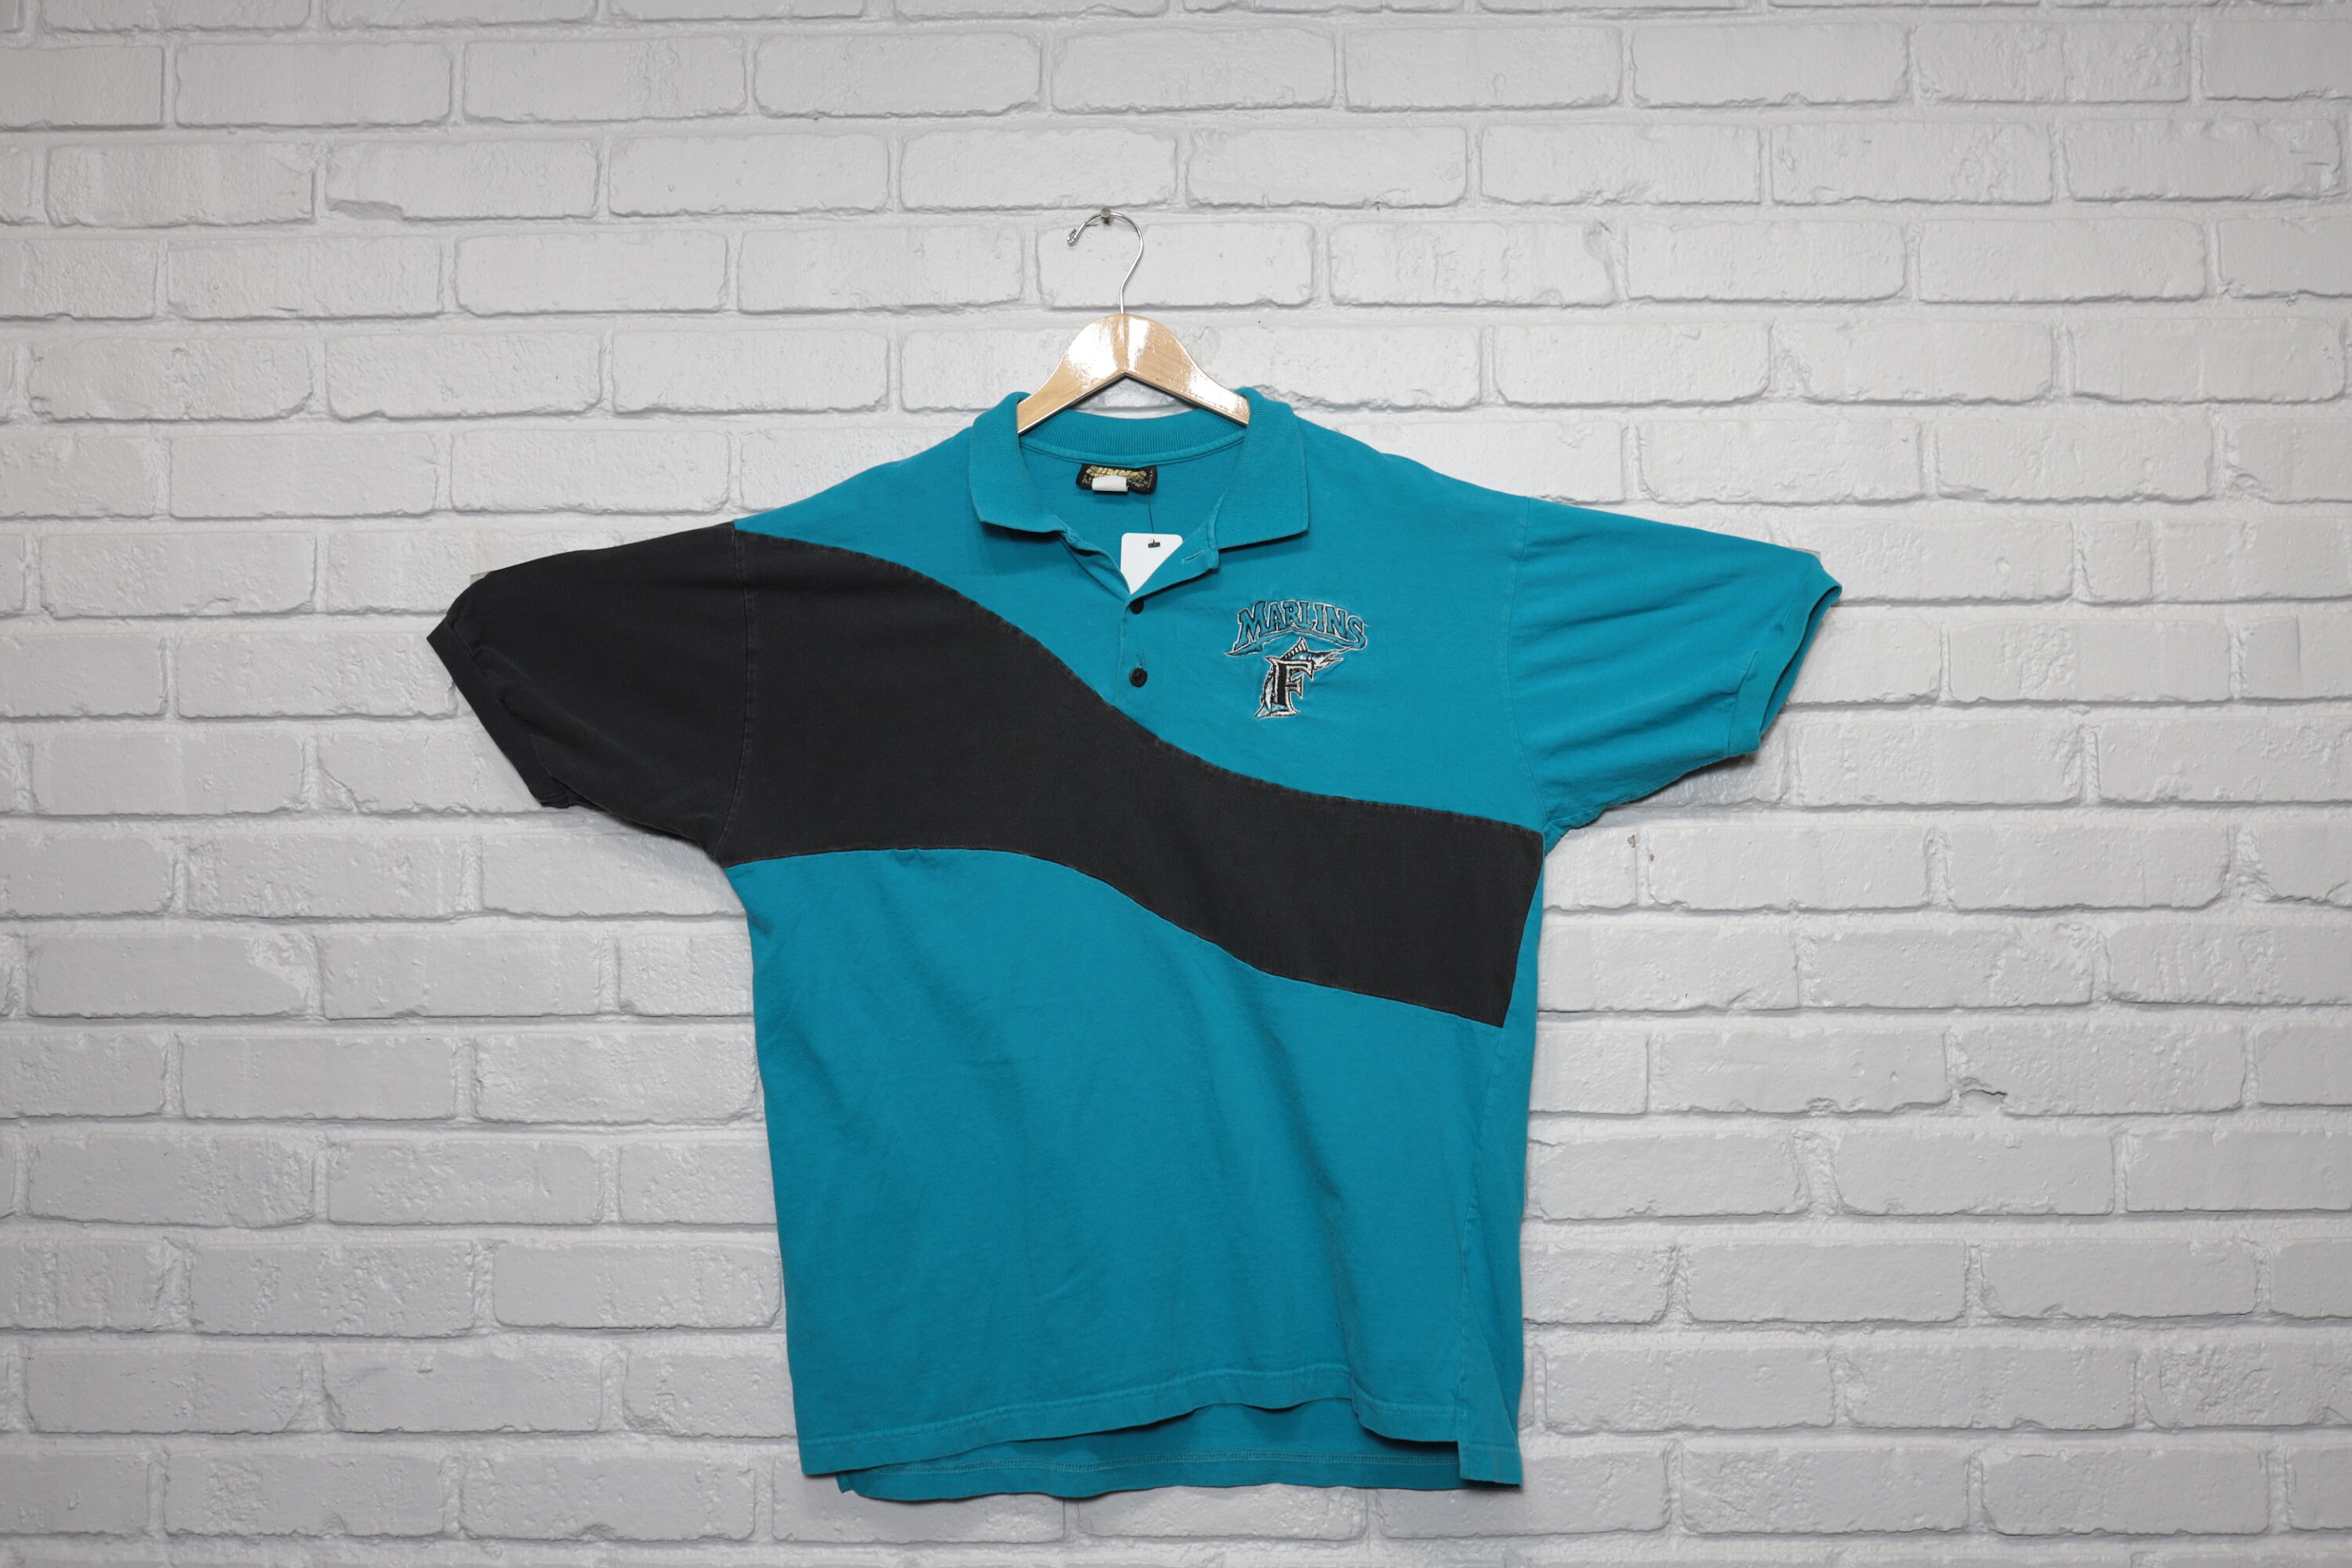 ThingsIBuyForYou Florida Marlins Vintage Russell Athletic Authentic Baseball Jersey (52)